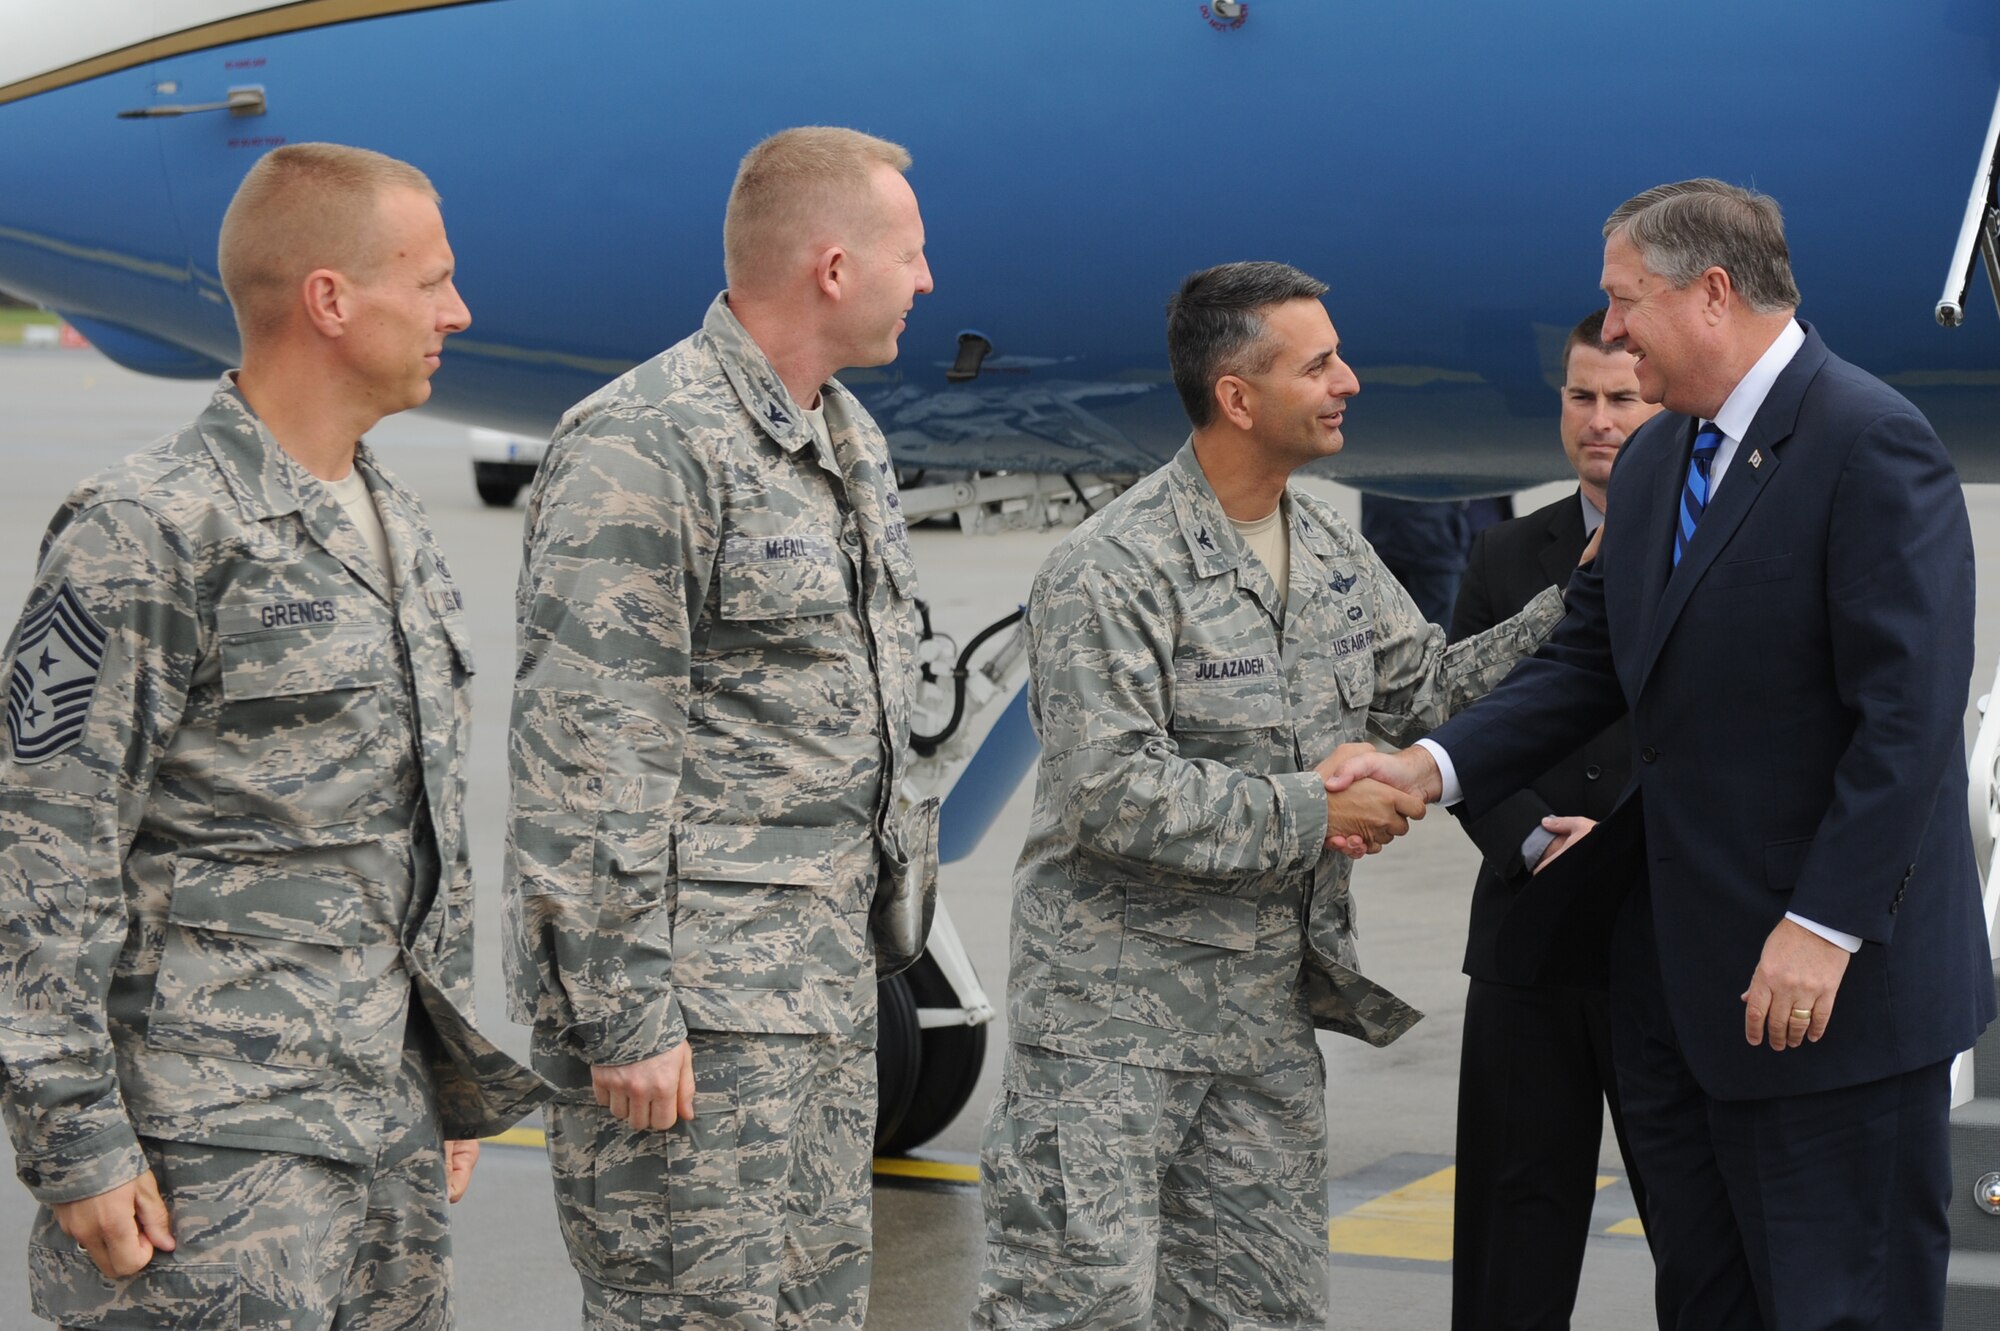 Col. David Julazadeh, 52nd Fighter Wing commander, greets Secretary of the Air Force Michael Donley upon his arrival at Spangdahlem Air Base, Germany, on July 13, 2012.  During his visit, the secretary learned about the mission of the 52nd FW and the unique capabilities the base provides to the European theater of operations. (U.S. Air Force photo/Senior Airman Matthew B. Fredericks/Released)